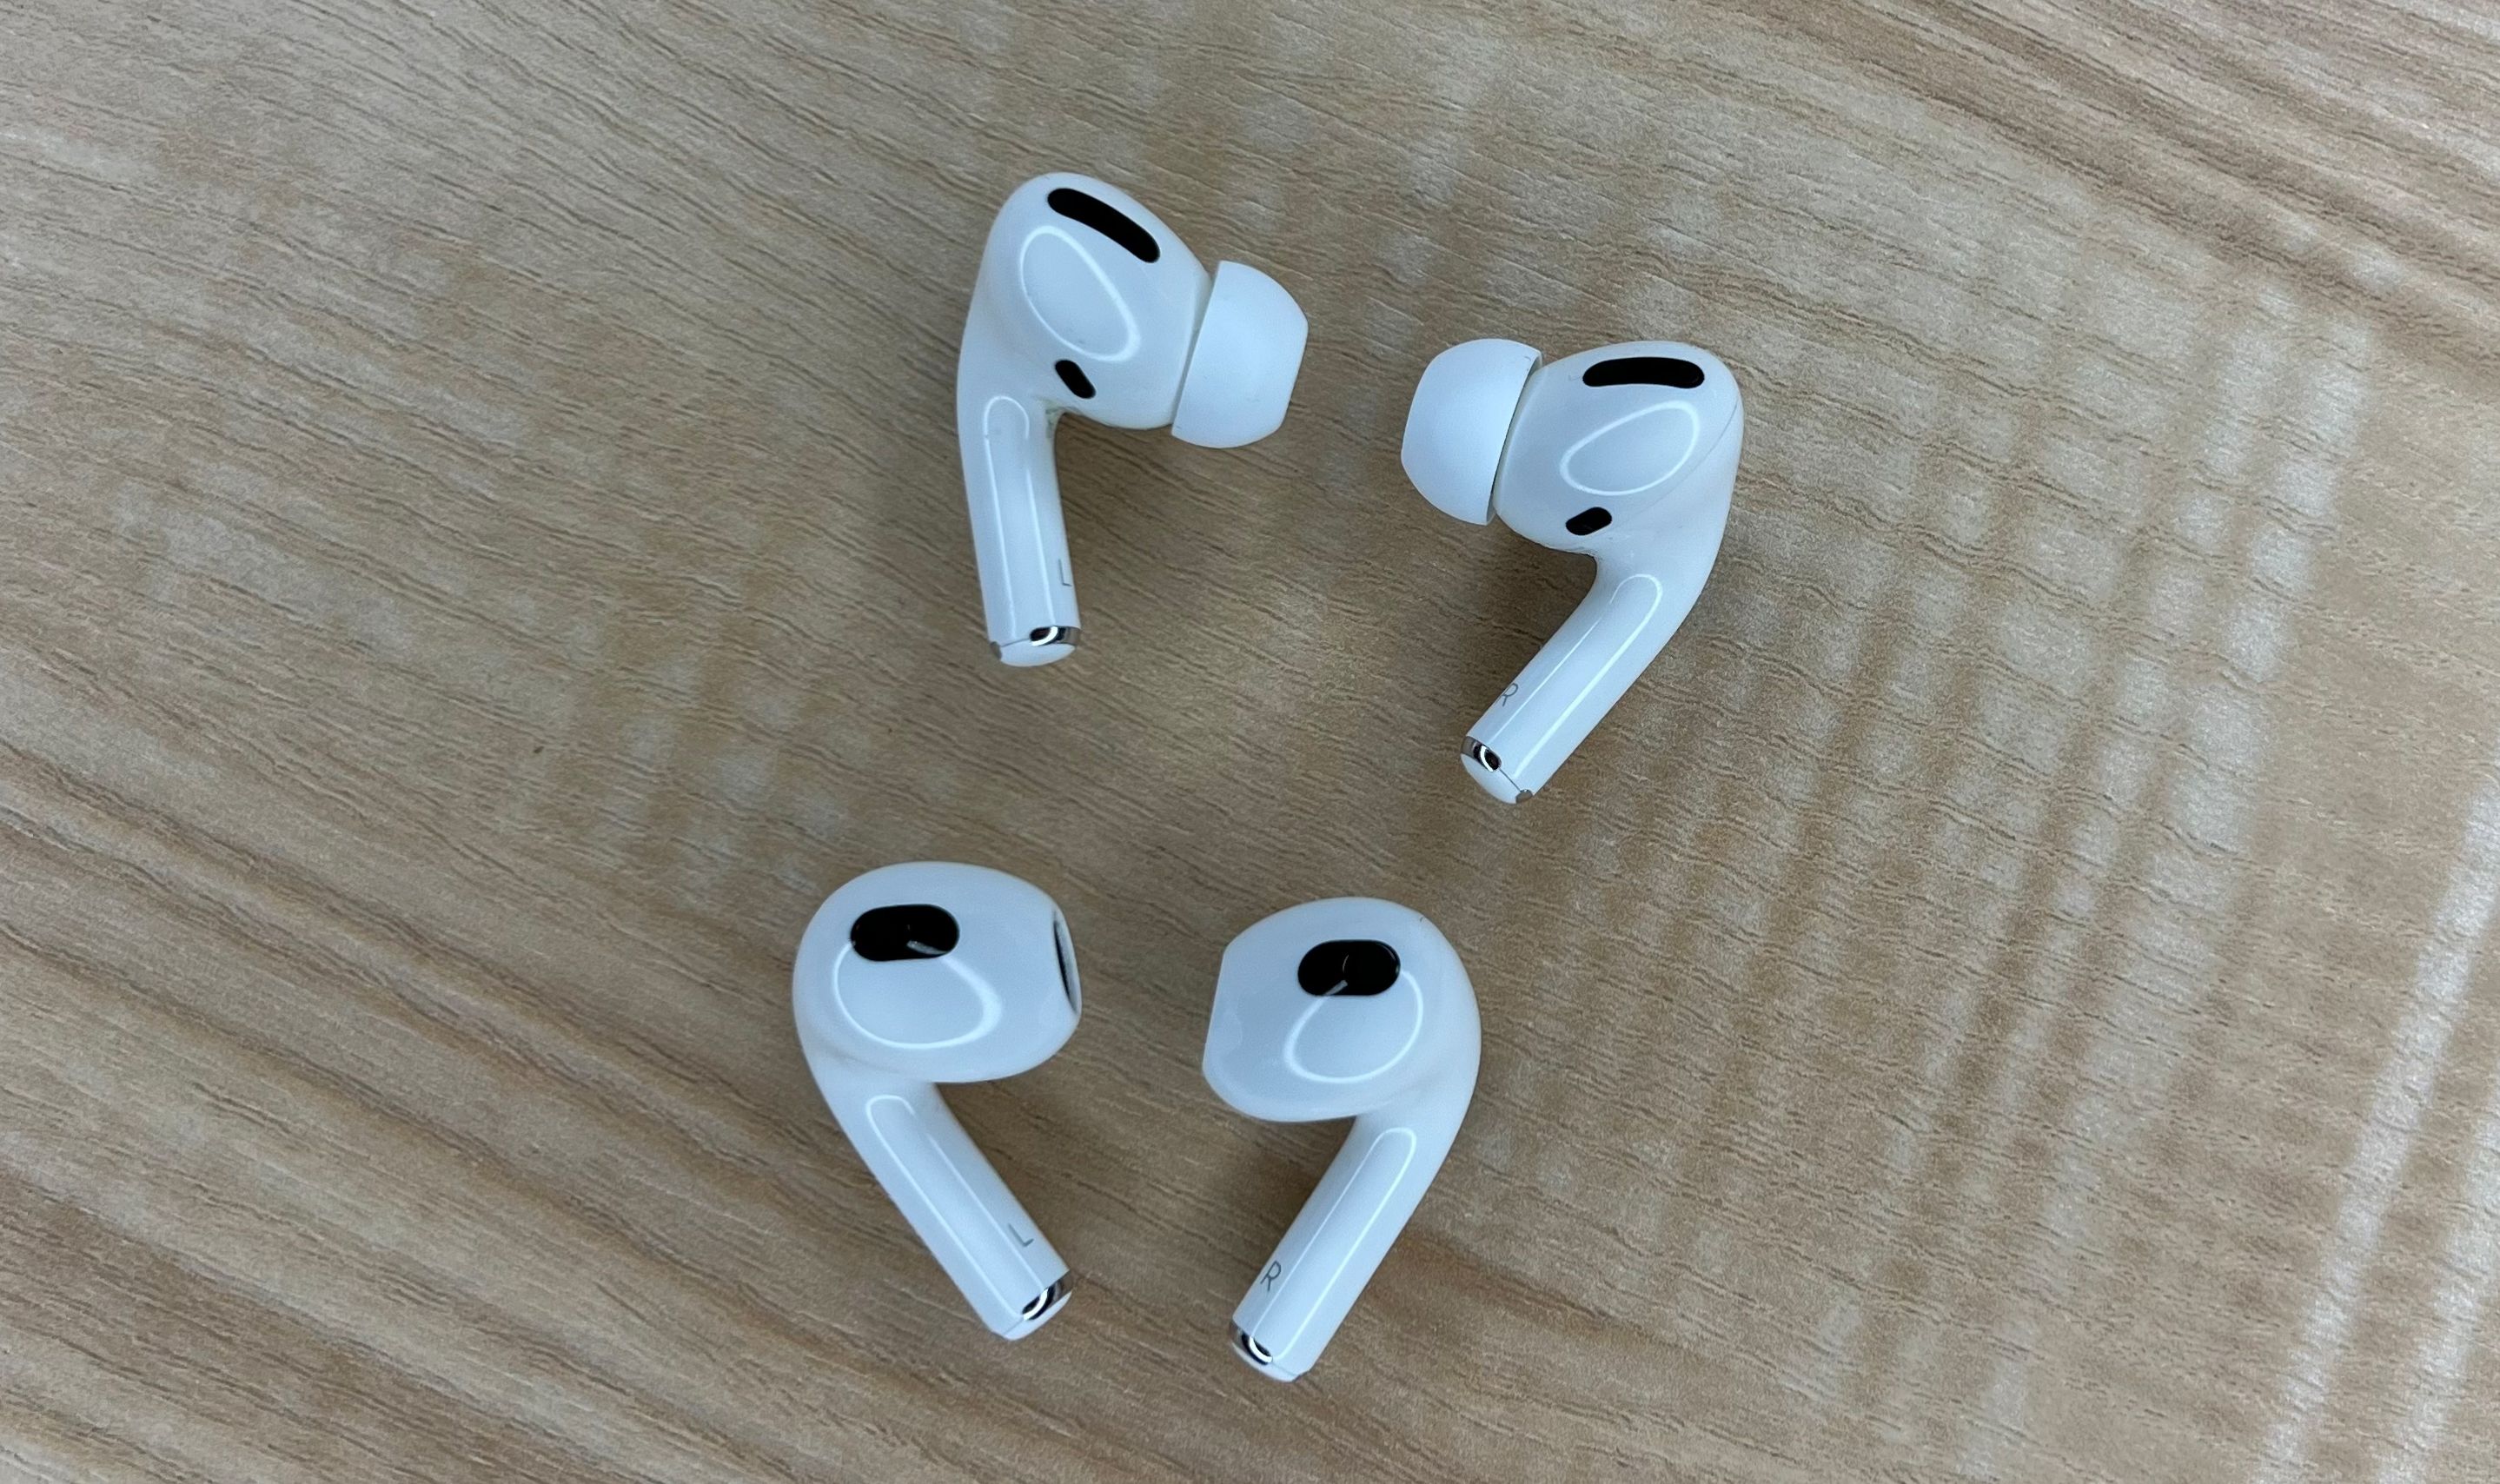 Baron Final vasketøj AirPods Pro vs. AirPods 3: What's the difference? | CNN Underscored